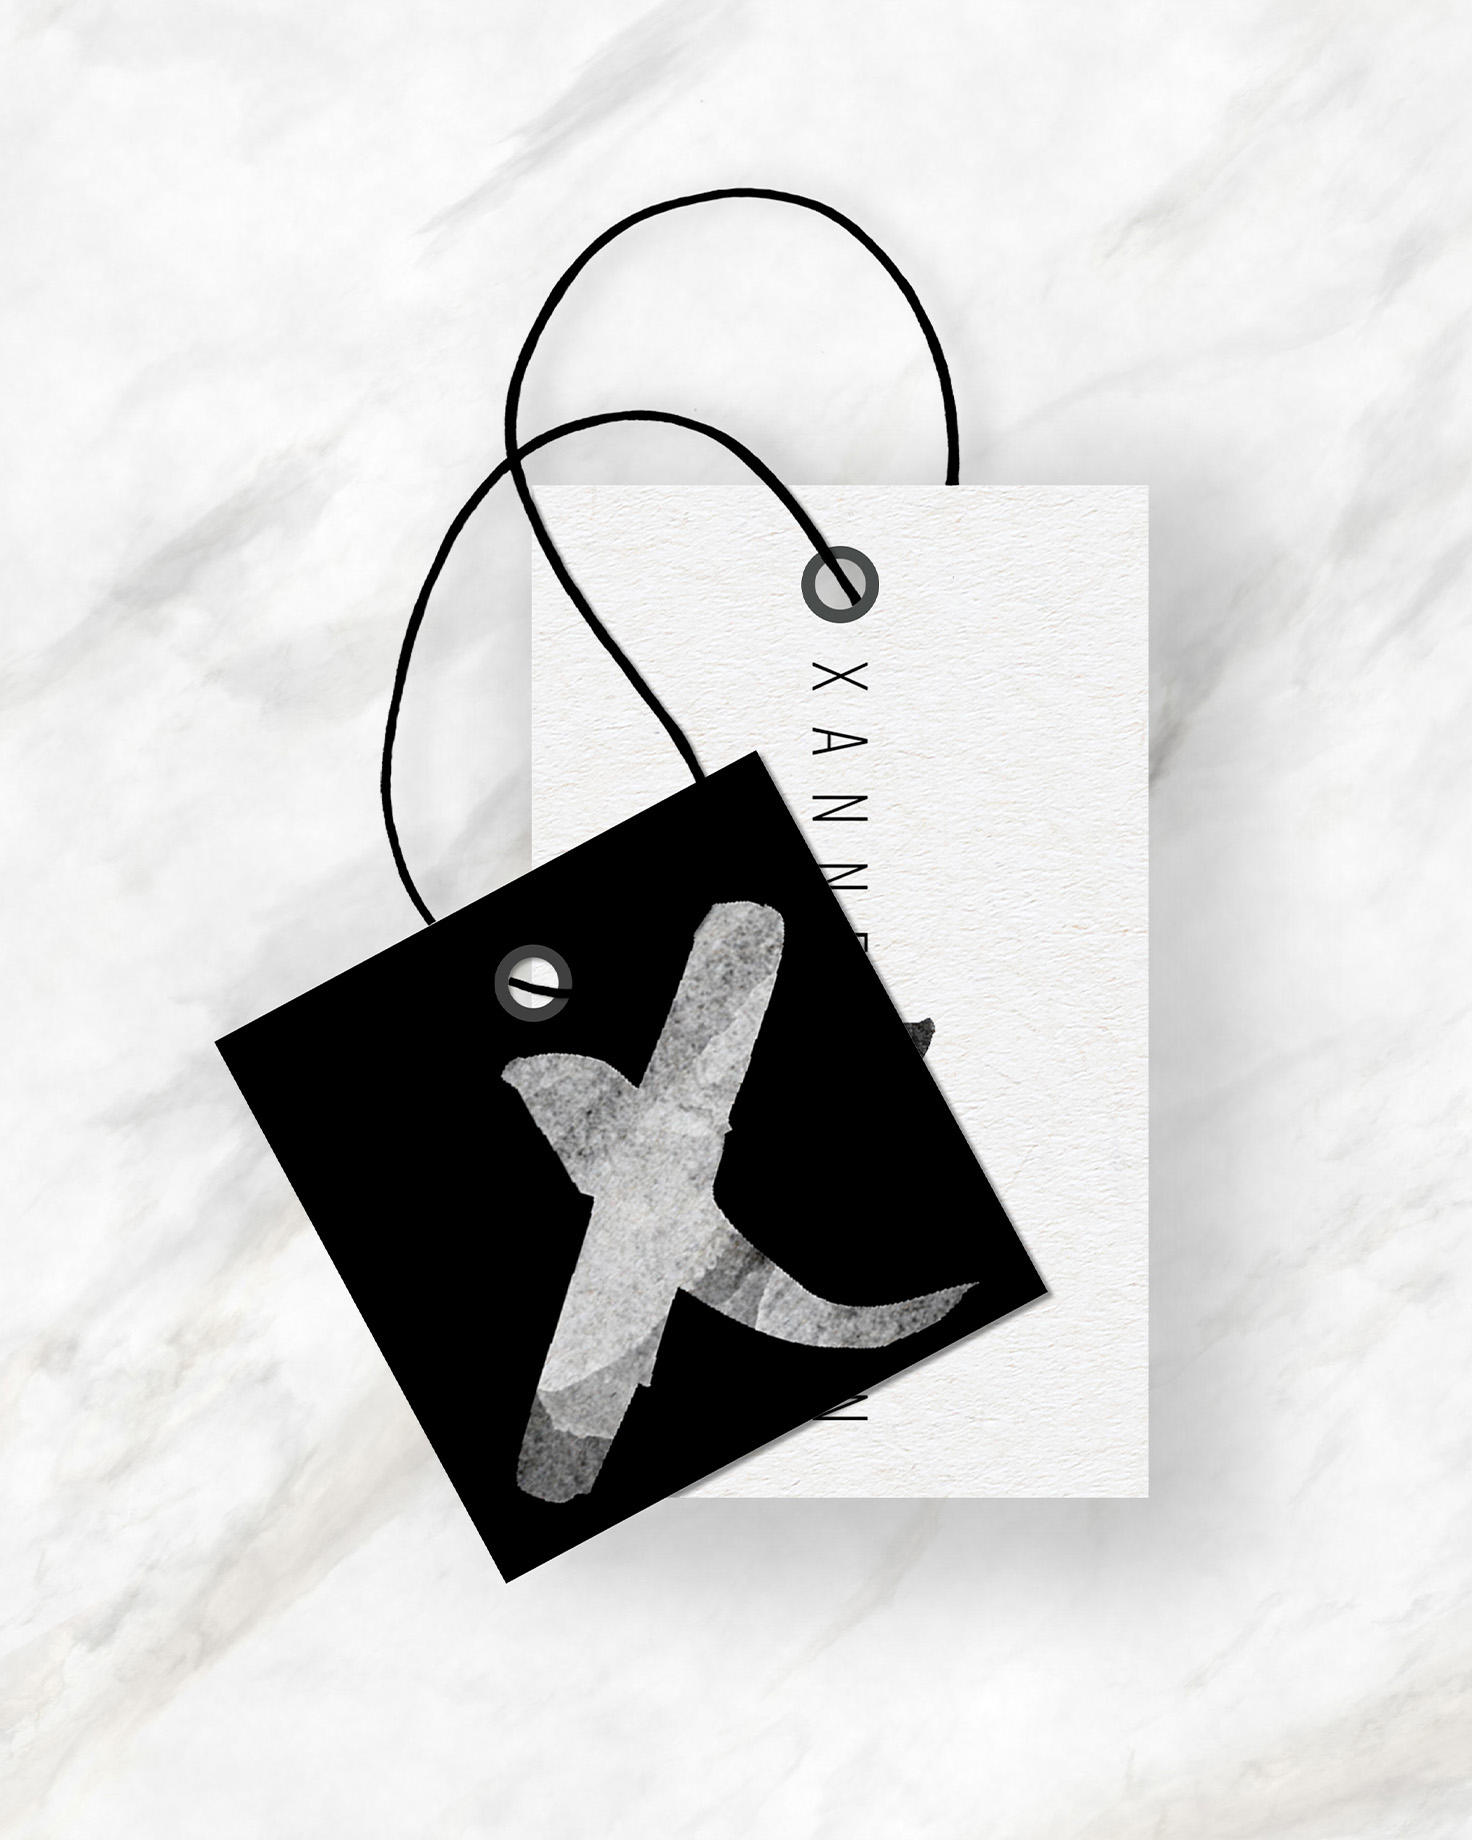 Brand tags with logo and icon - Xanne Fran - Whiskey and Red Small Business Branding and Website Design Packages